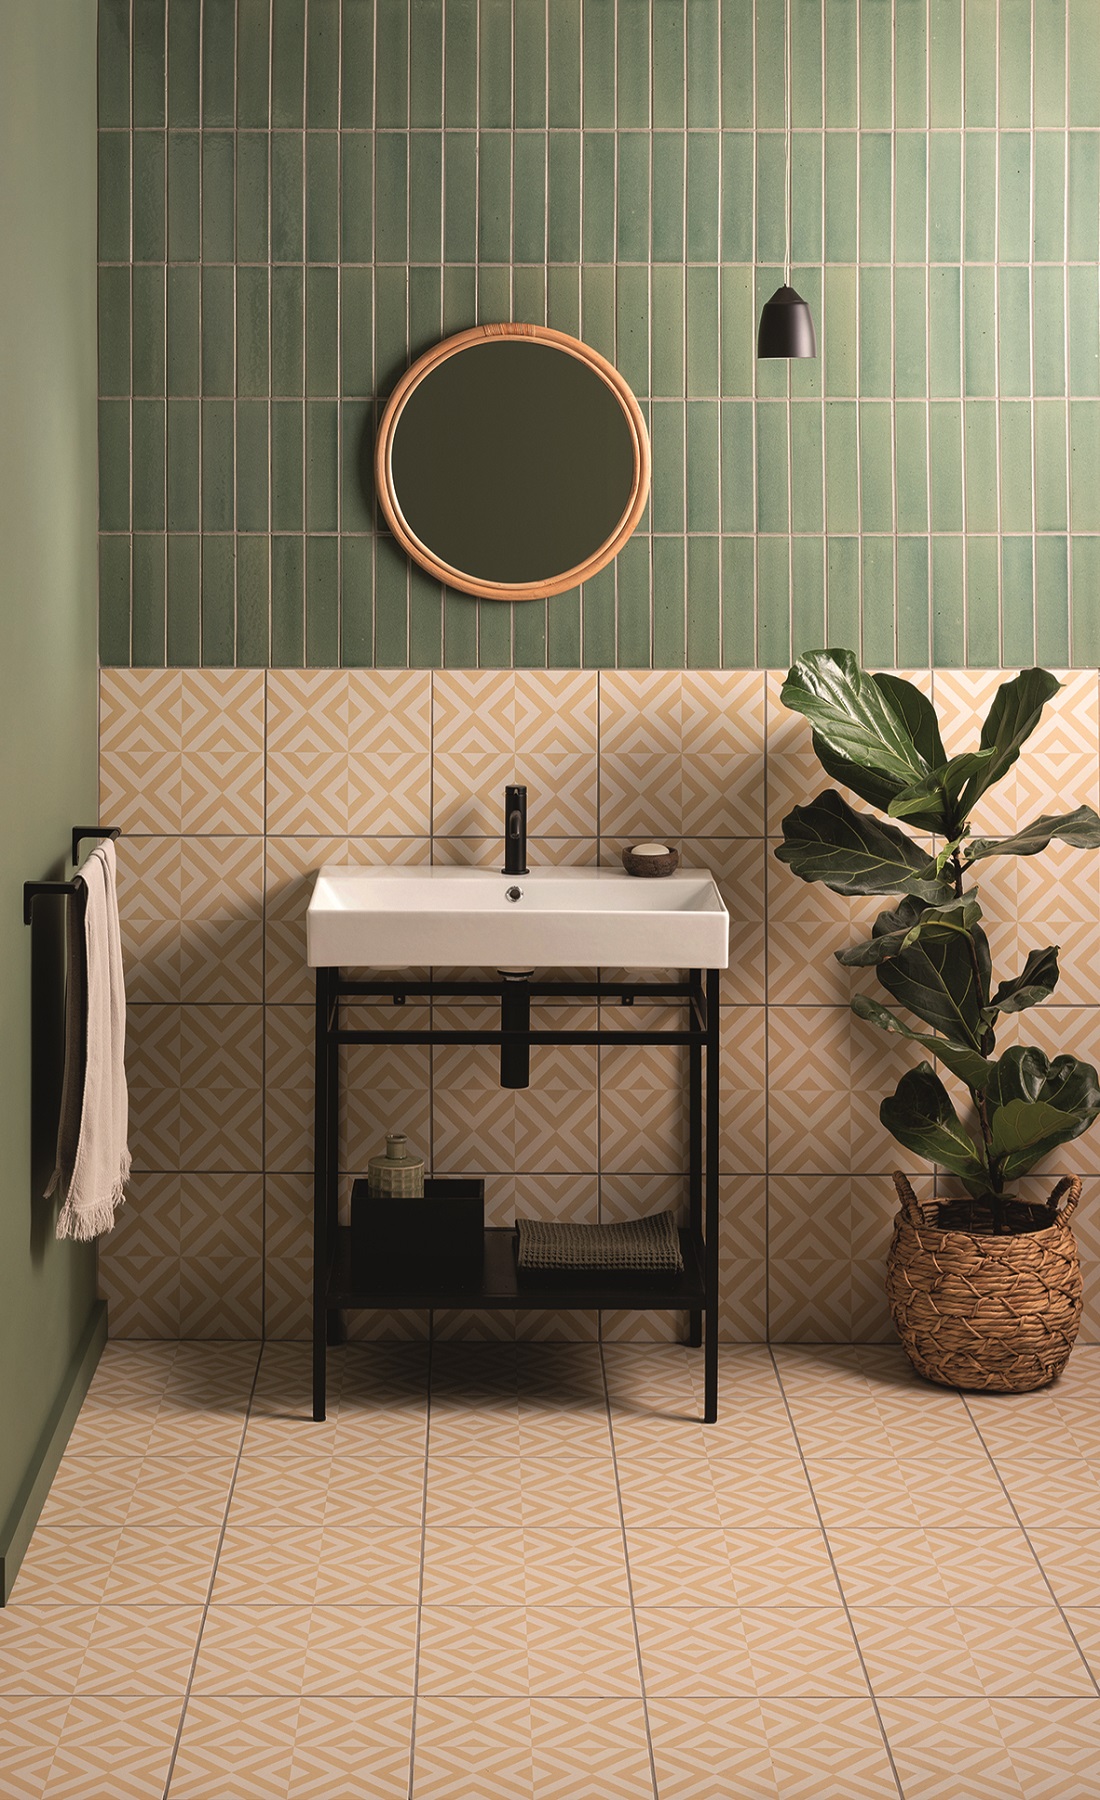 yellow patterned floor tiles contrast with green wall tiles with industrial style washbasin and green plant in cloakroom design